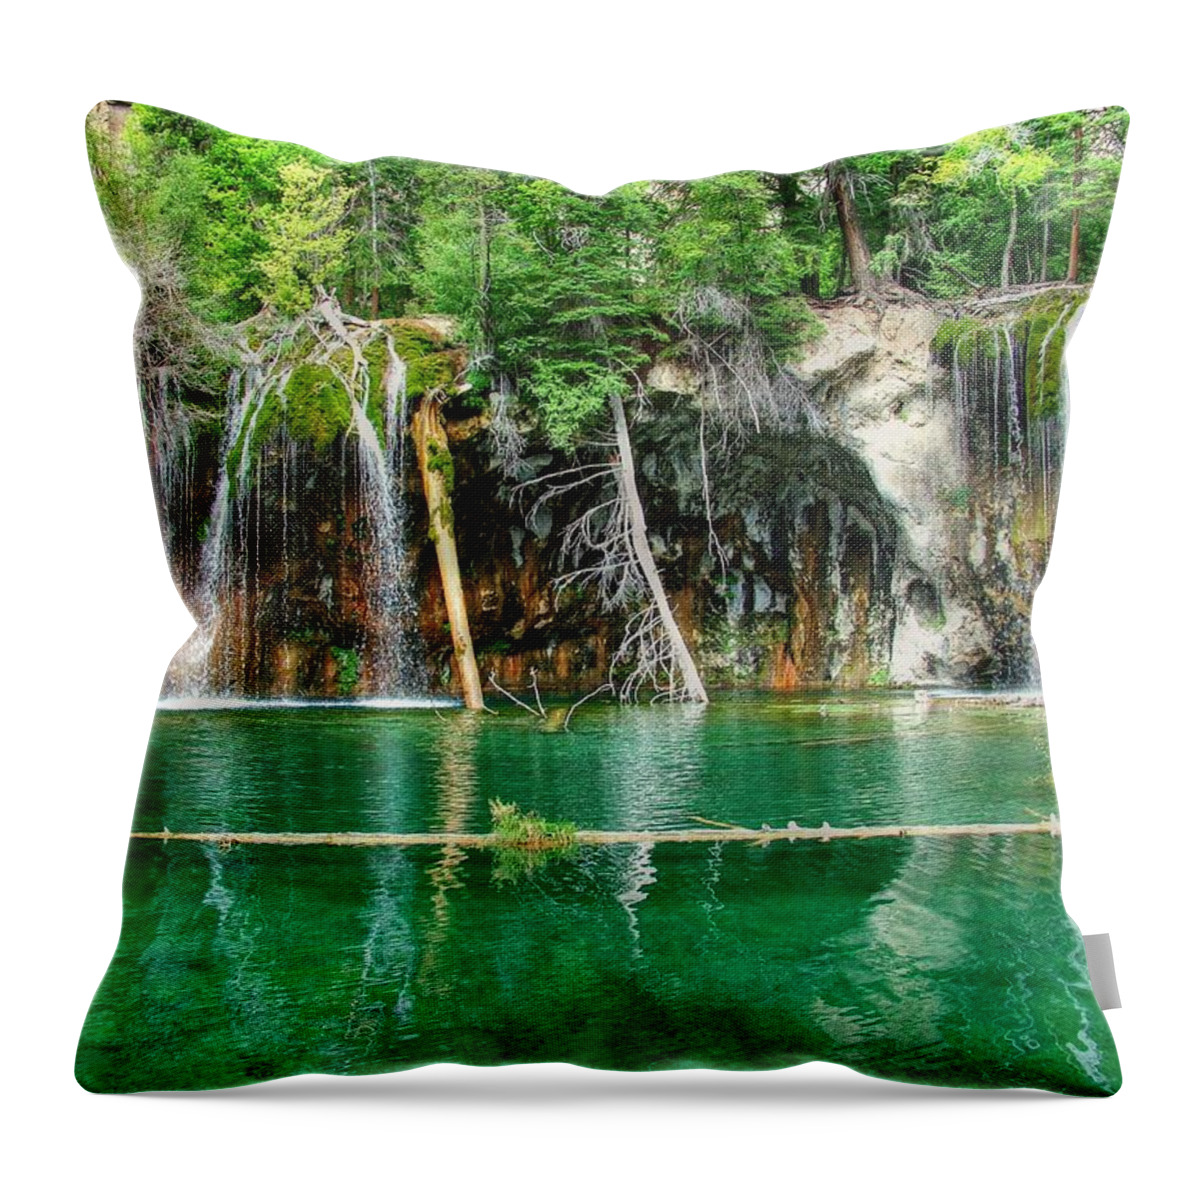 Hanging Lake Throw Pillow featuring the photograph Hanging Lake 1 by Ken Smith